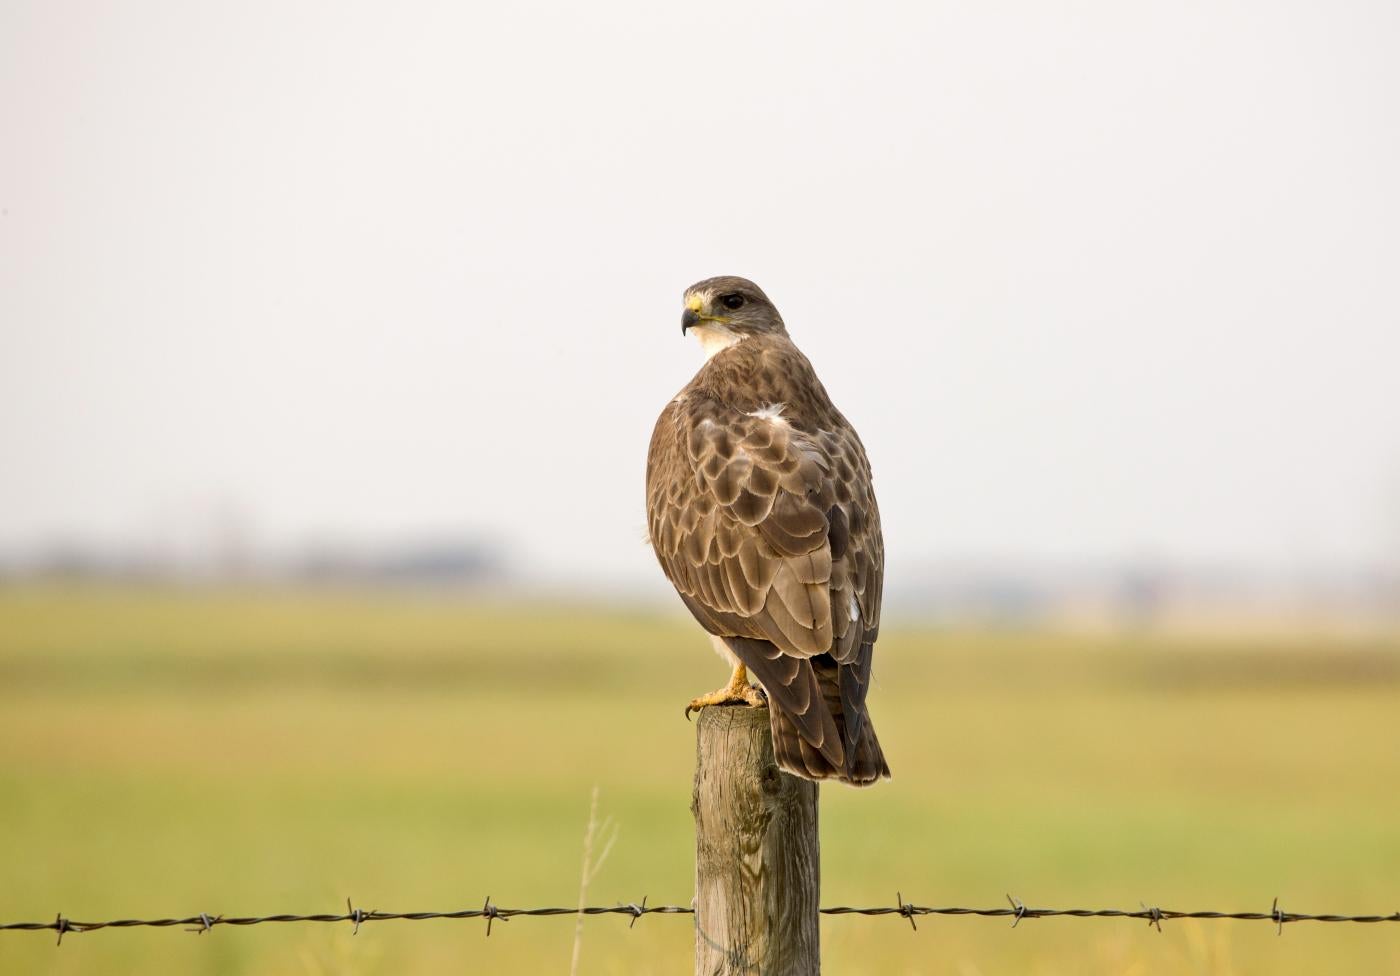 A large hawk with broad wings and a short tail, called a Swainson's hawk, perched on a wooden fence post in an open field